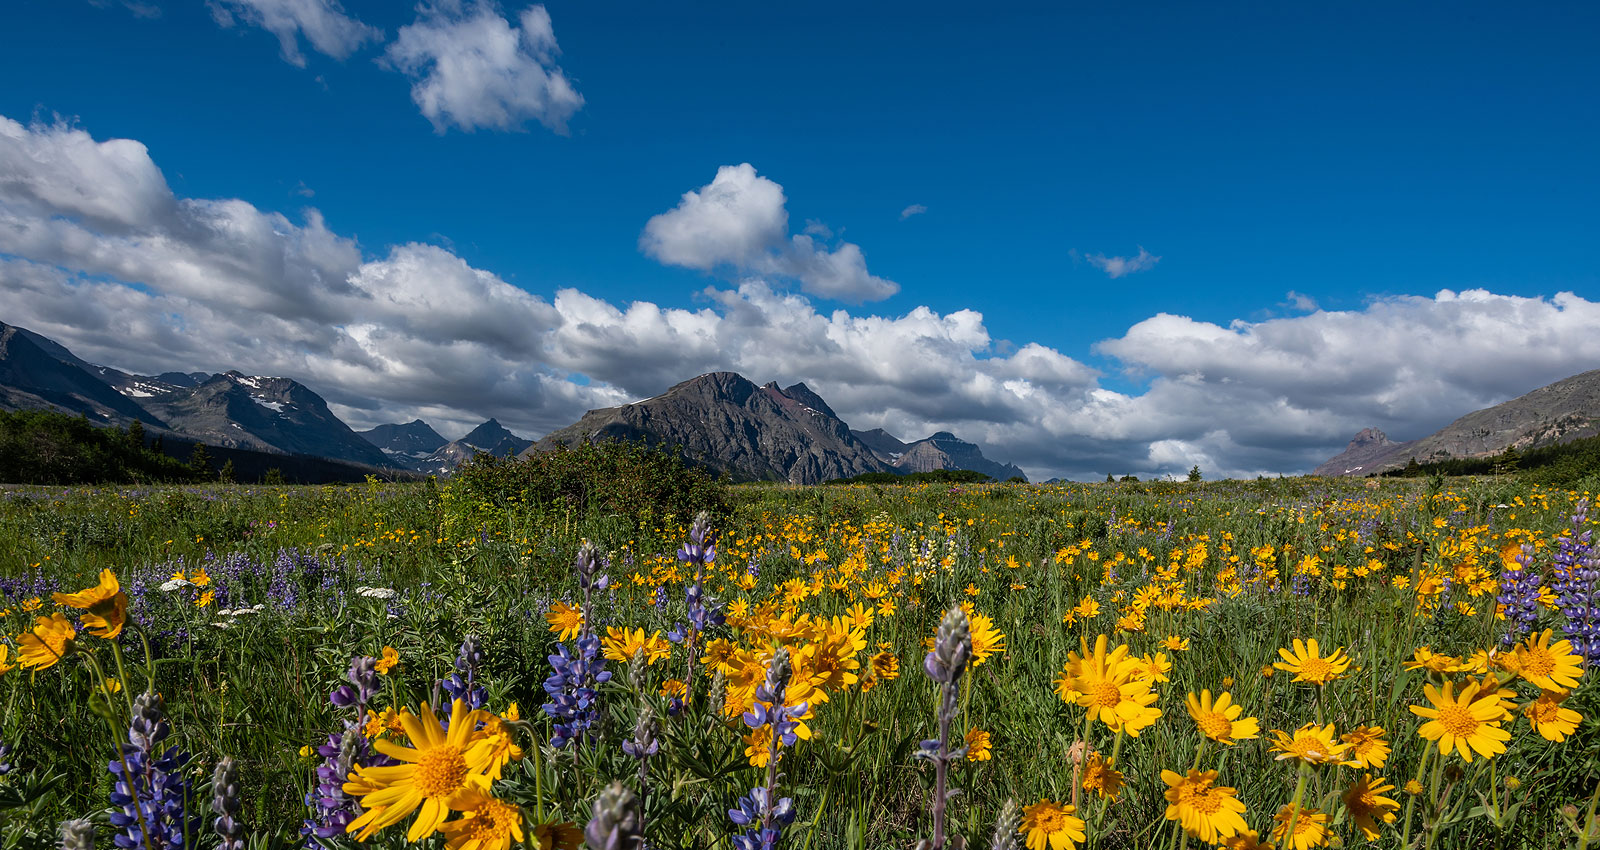 A wide range of flowers and mountains